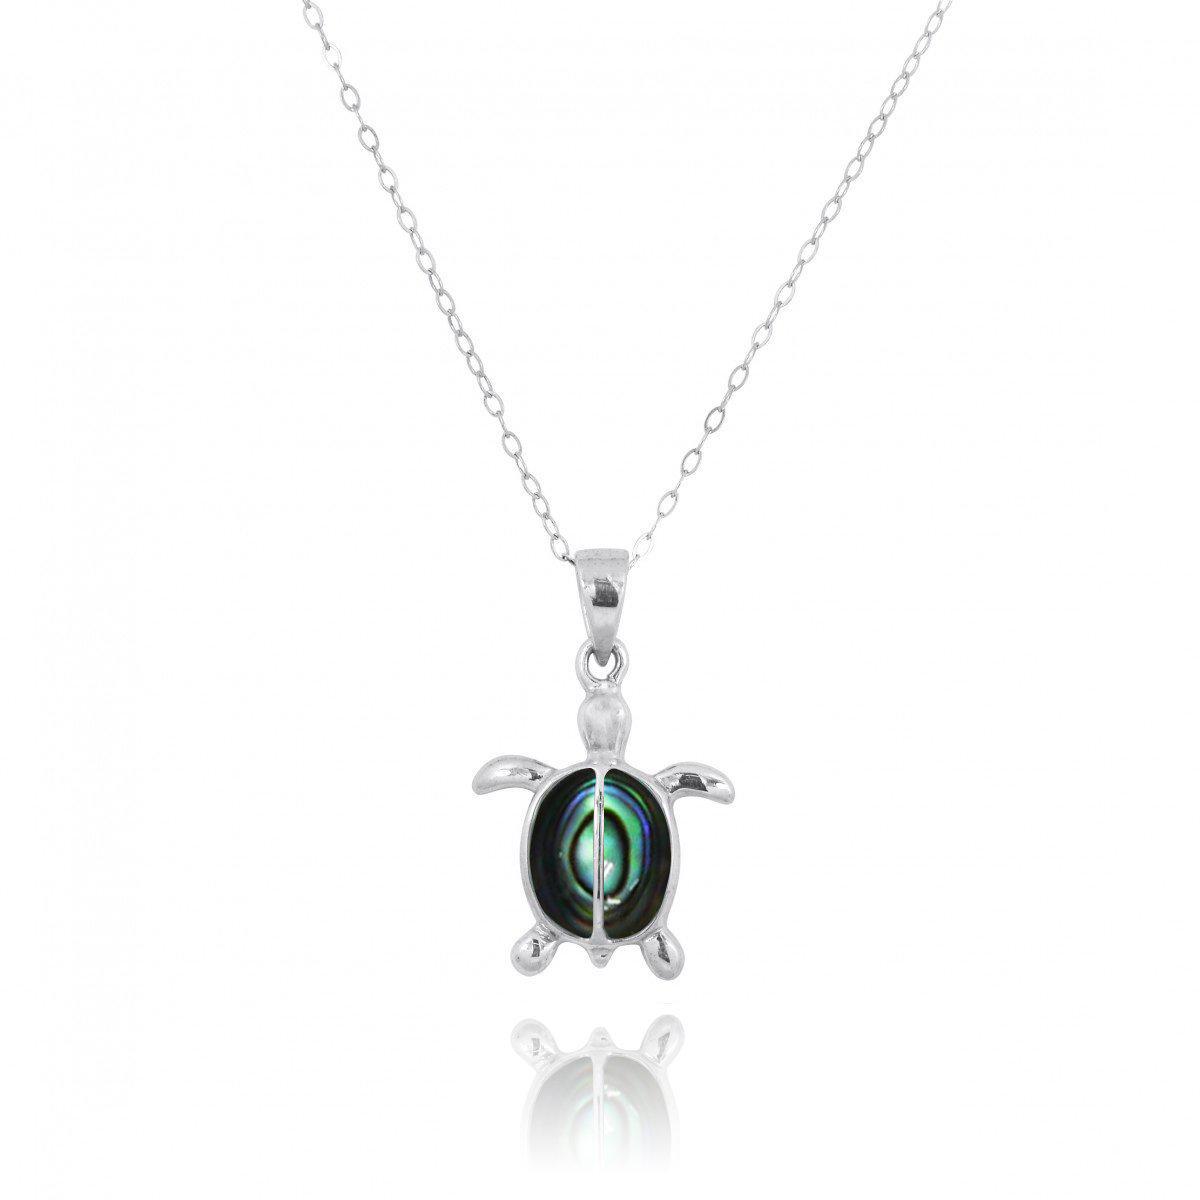 Sea Turtle Pendant Necklace with Abalone Shell